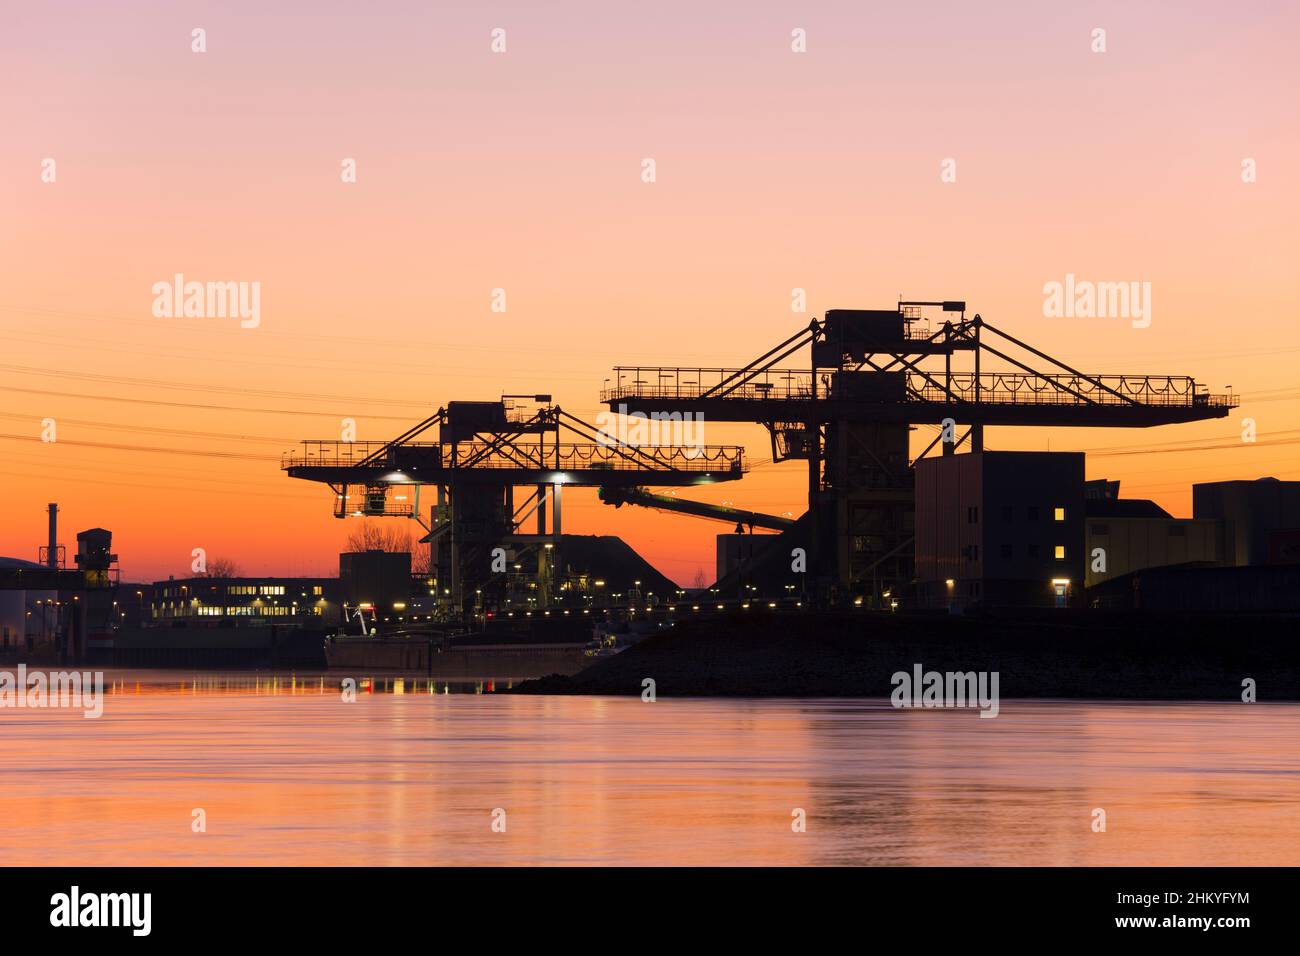 Cranes in a harbour at sunrise or sunset Stock Photo